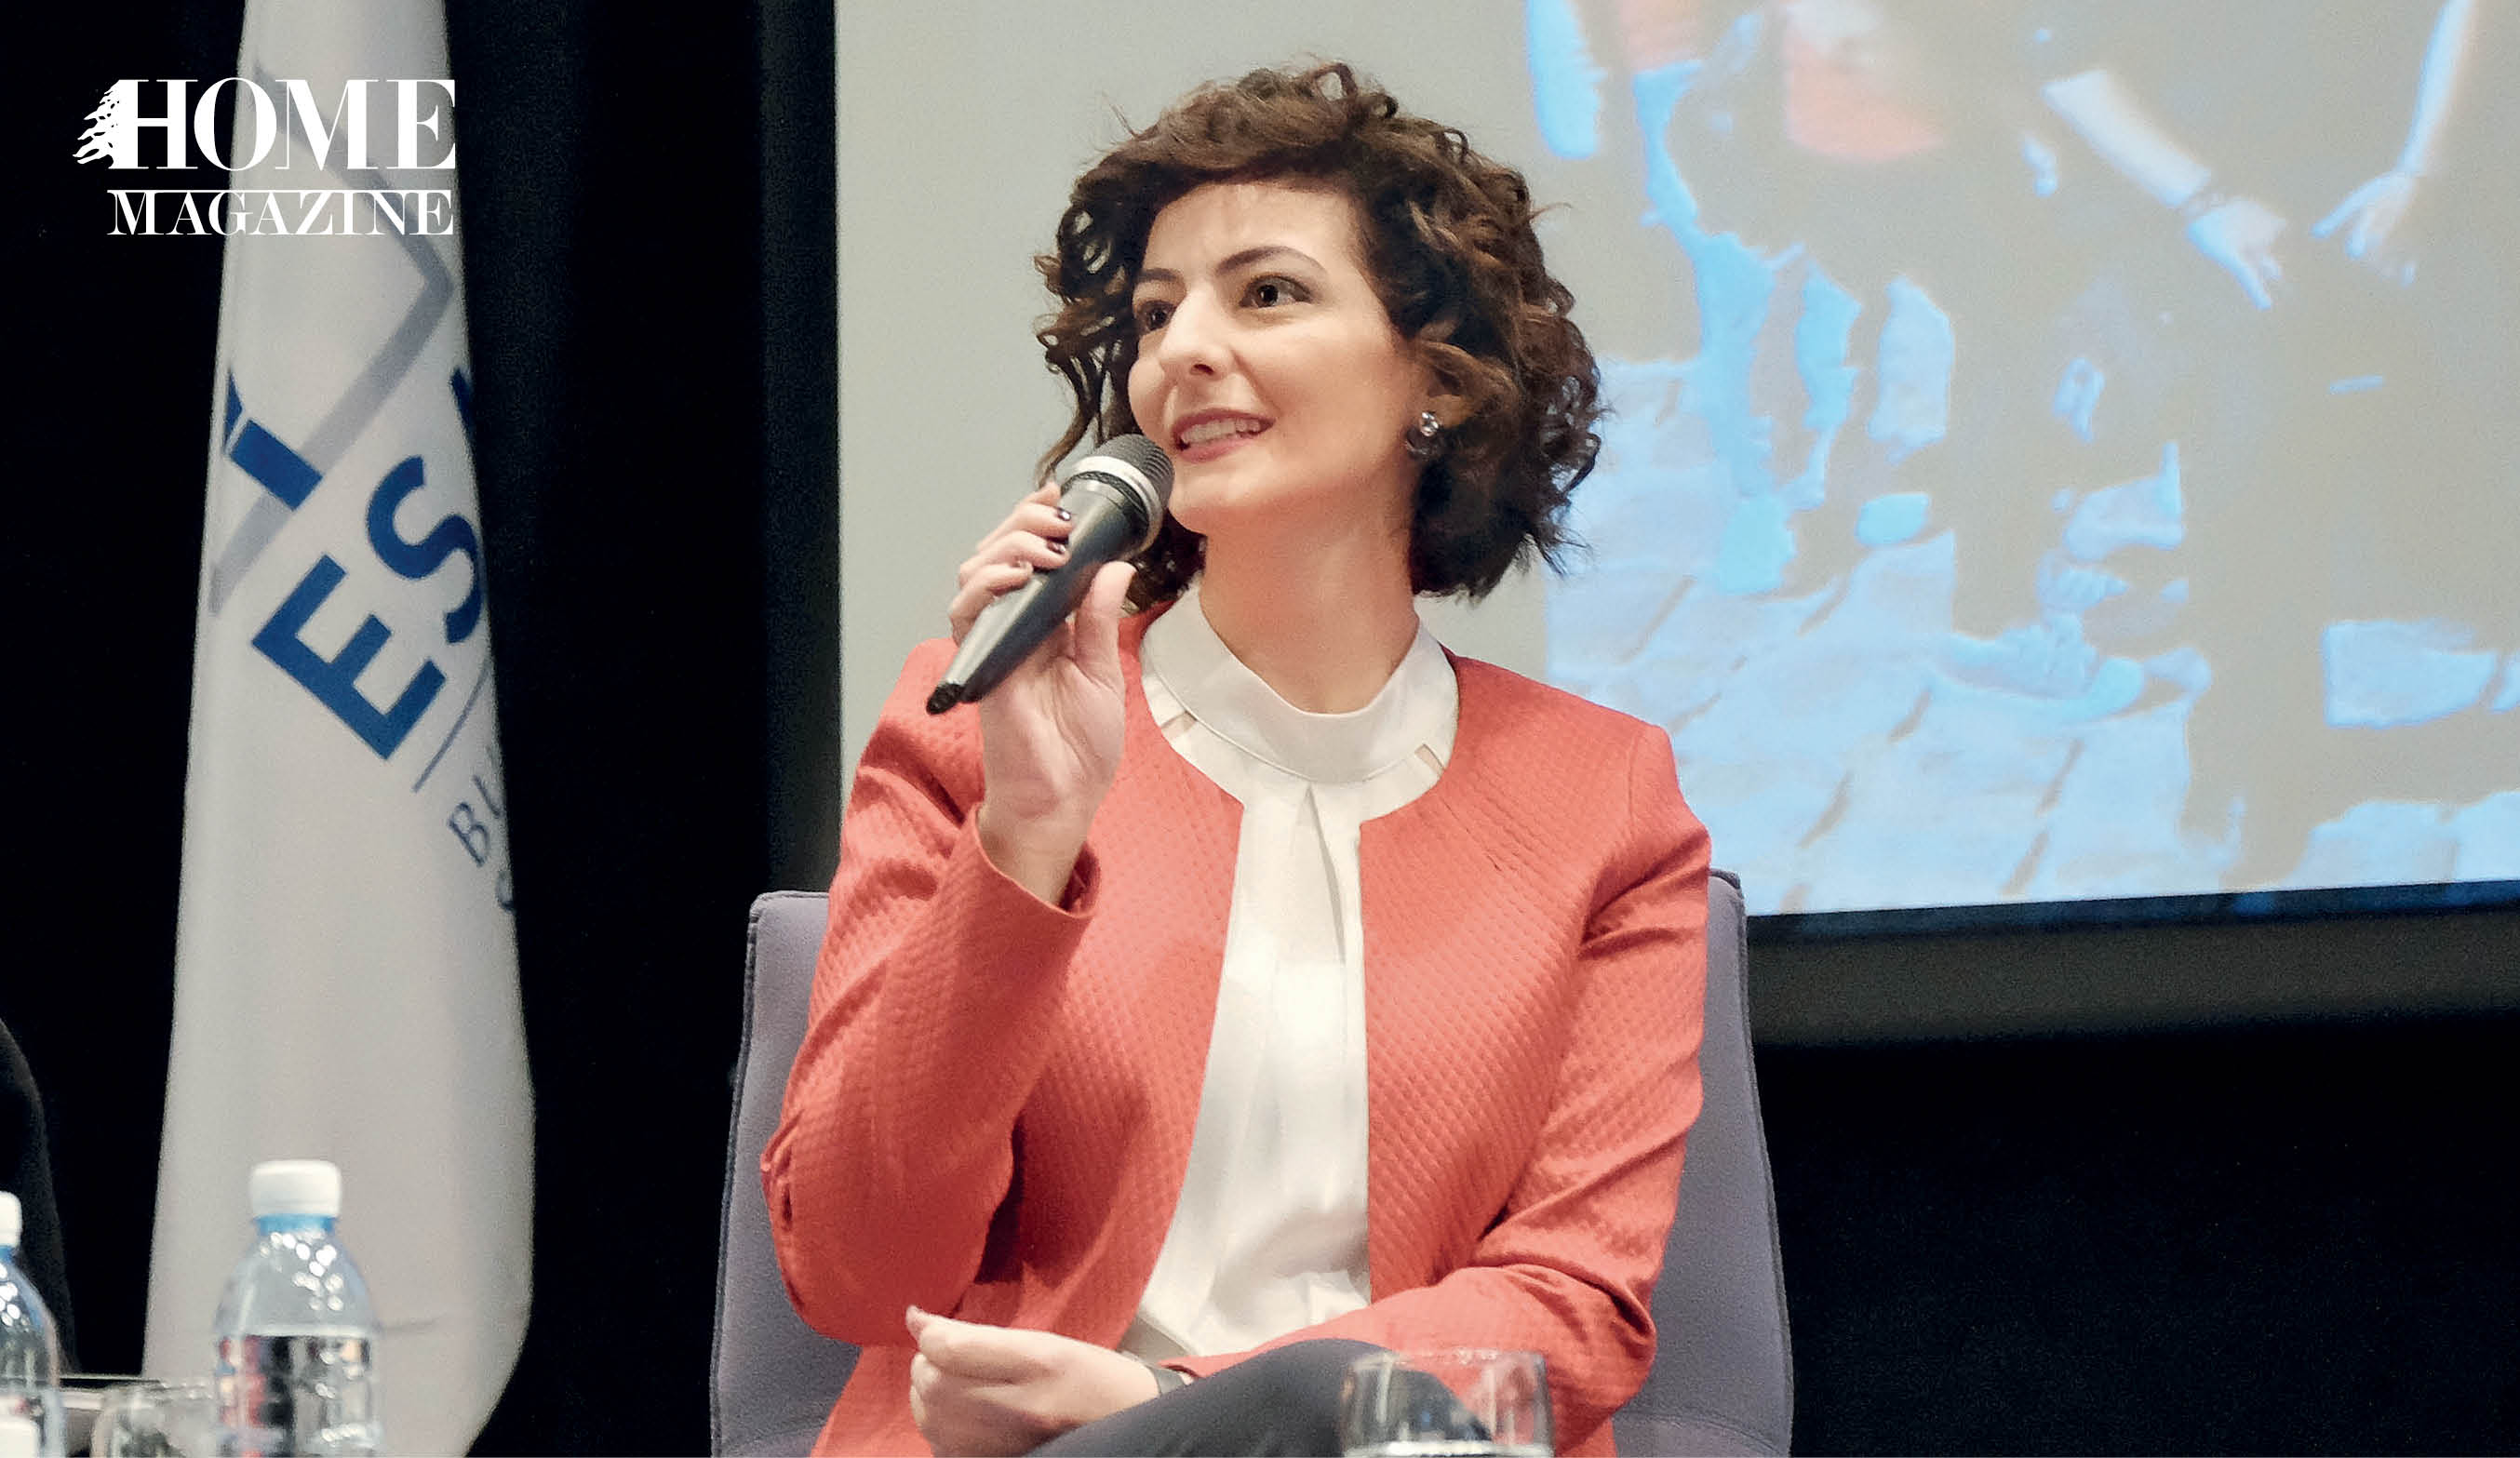 Woman in pink jacket and white blouse speaking on microphone in hand